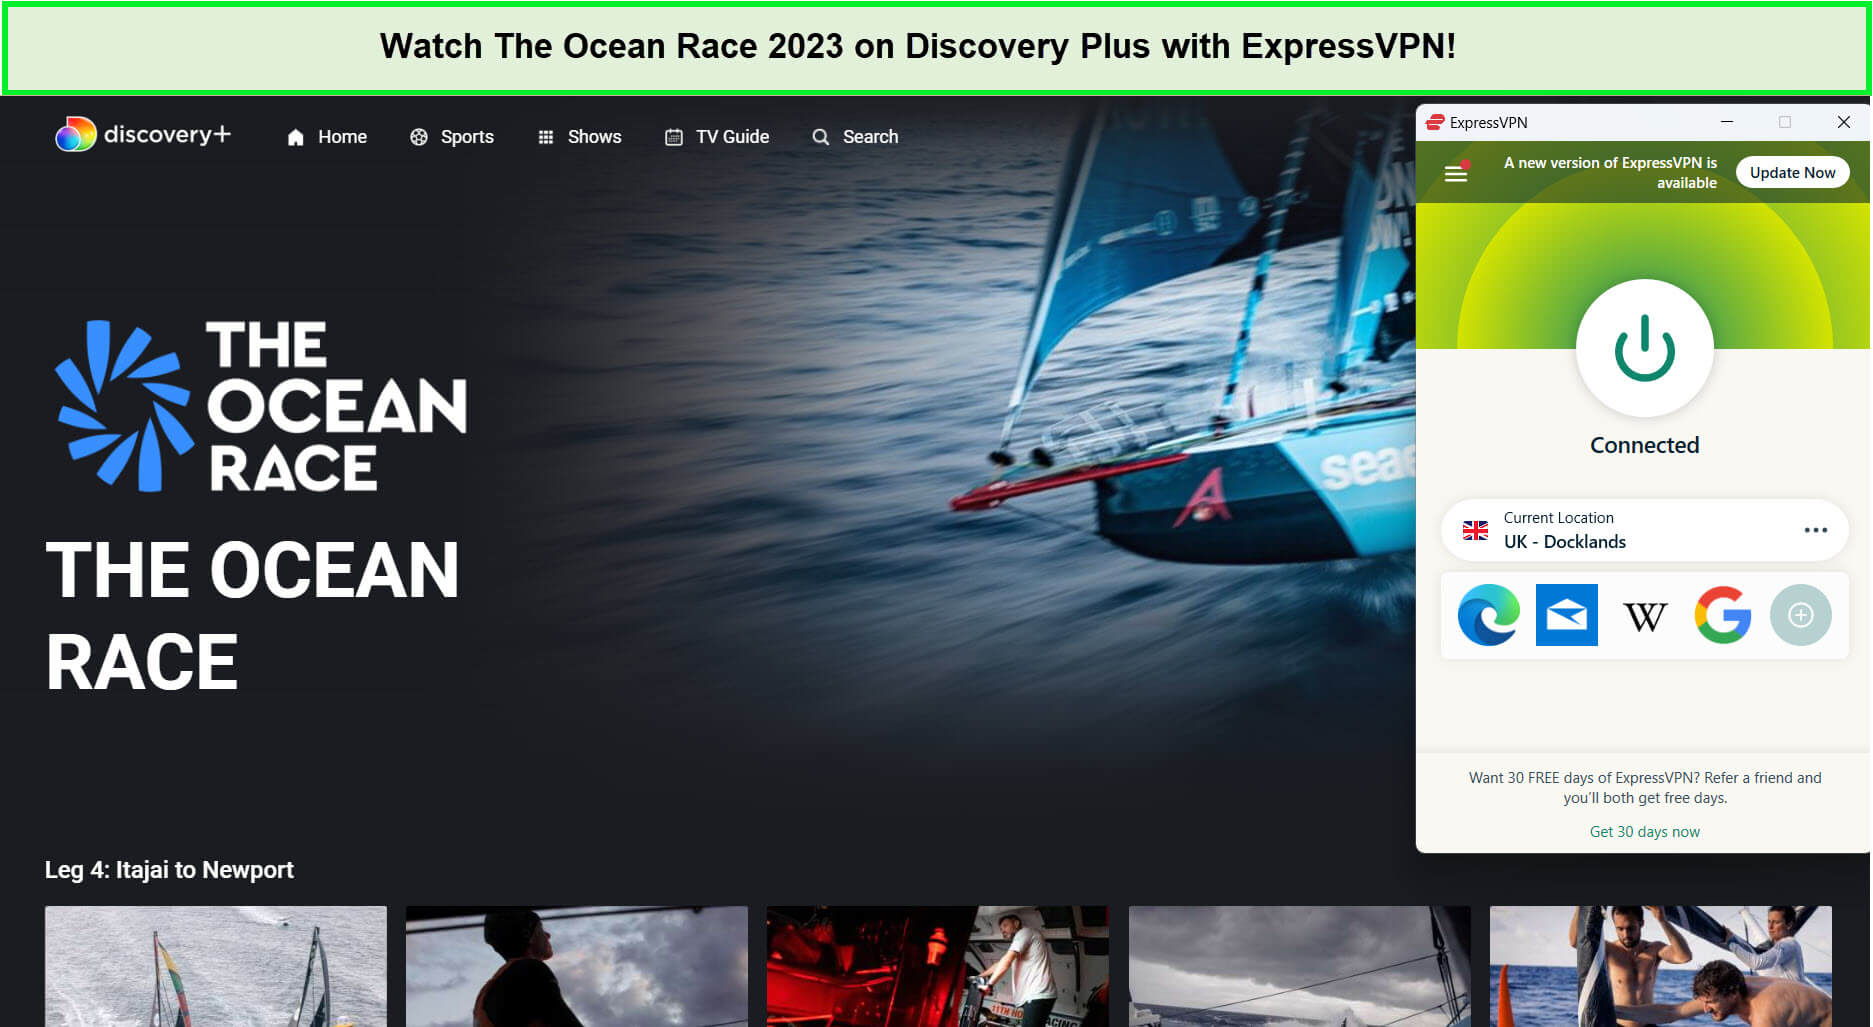 expressvpn-unblocks-the-ocean-race-2023-live-in-Spain-on-discovery-plus